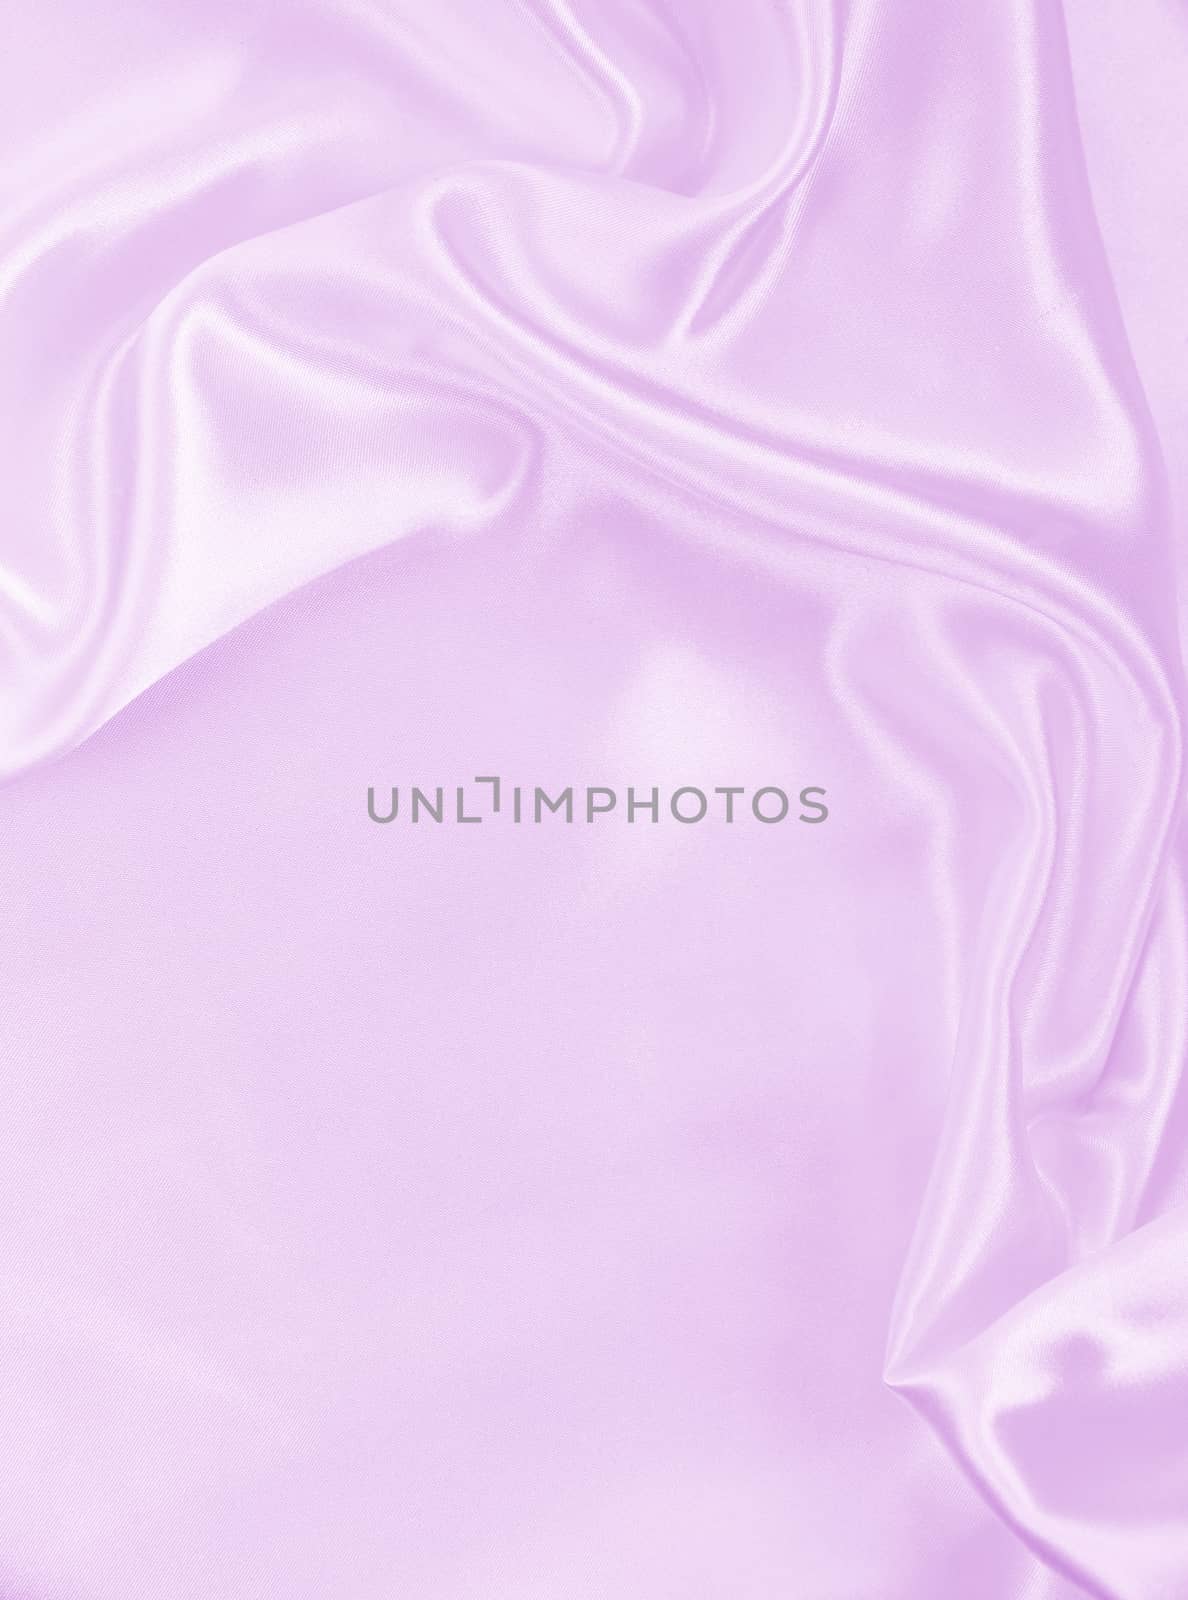 Smooth elegant lilac silk or satin texture as background  by oxanatravel